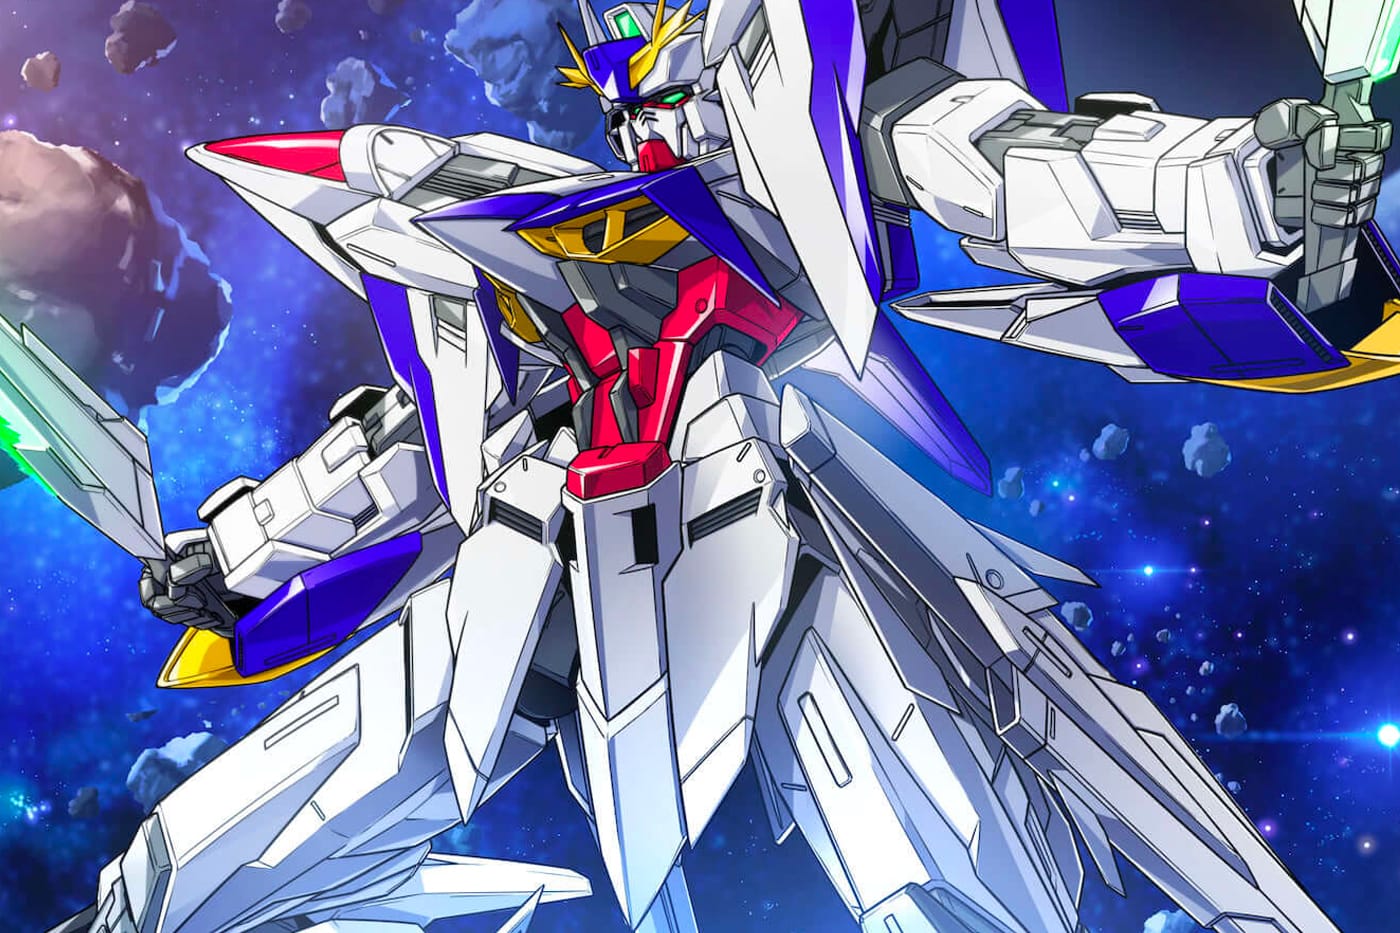 Anime Trending - 【BREAKING】Mobile Suit Gundam SEED FREEDOM - New Anime  Trailer Revealed! The film is scheduled for January 26 in Japan. More News  at Anime Trending News | Facebook